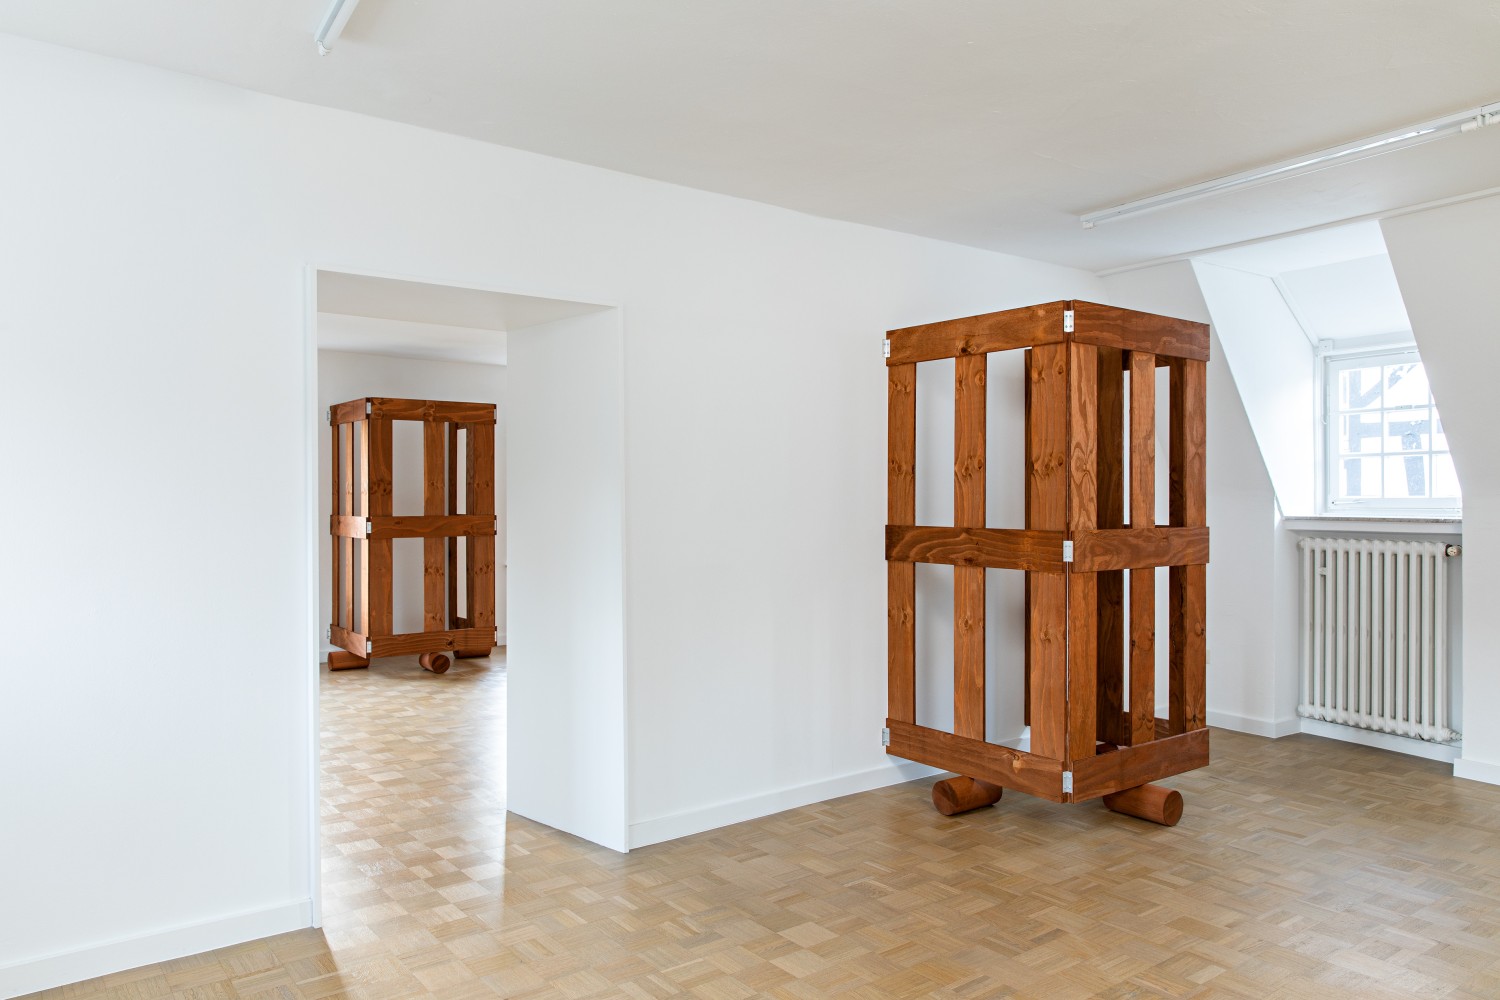 Wooden gates were also installed on the upper floor. One in the front room and two in the back, with only the frontmost and the rearmost visible in the exhibition view. In general, no more than two gates can be seen at any one time.